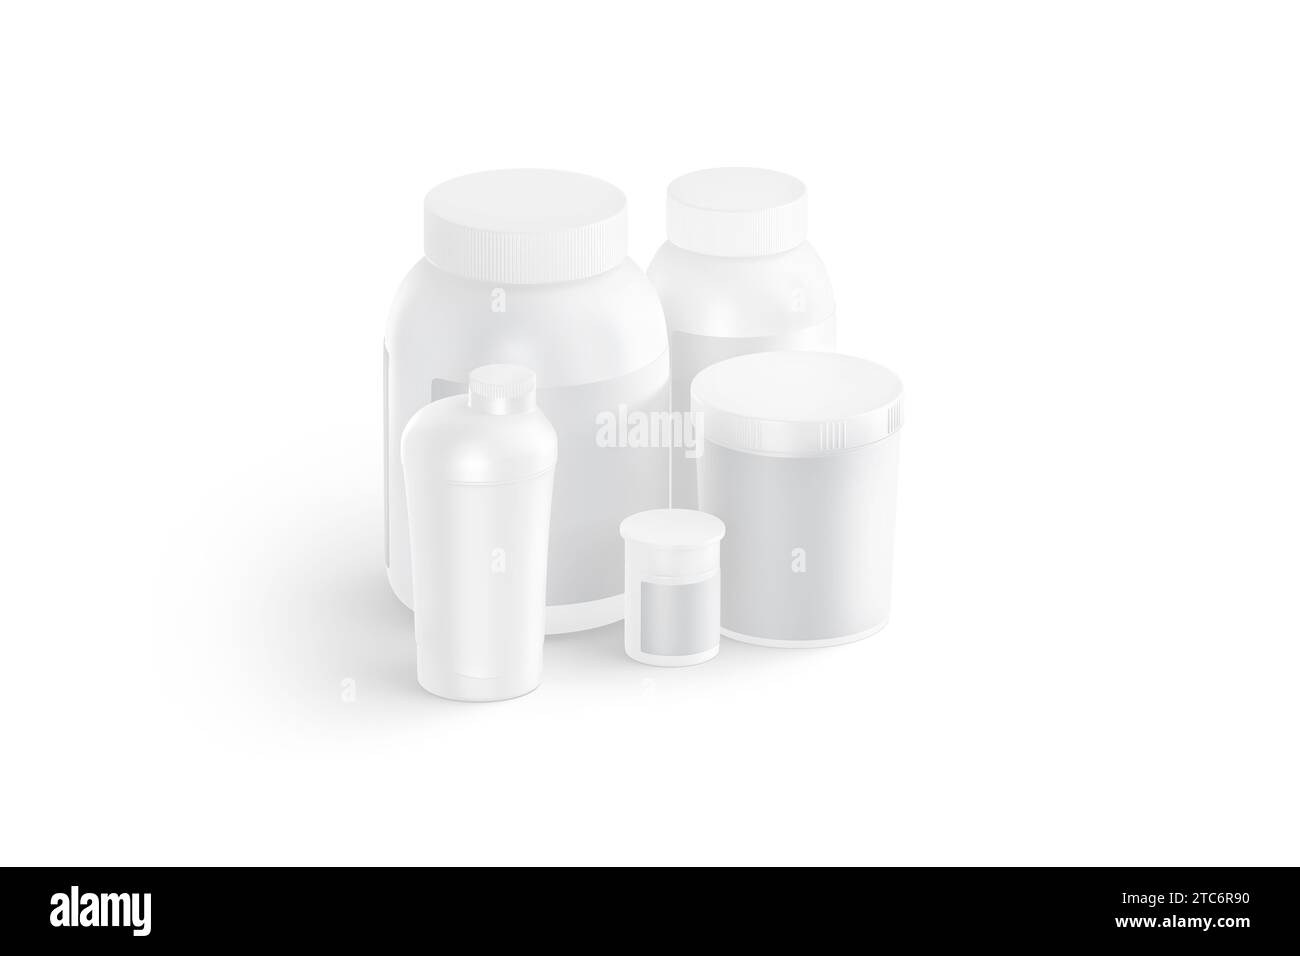 Two Black Shaker Bottle Mockups, Small and Big